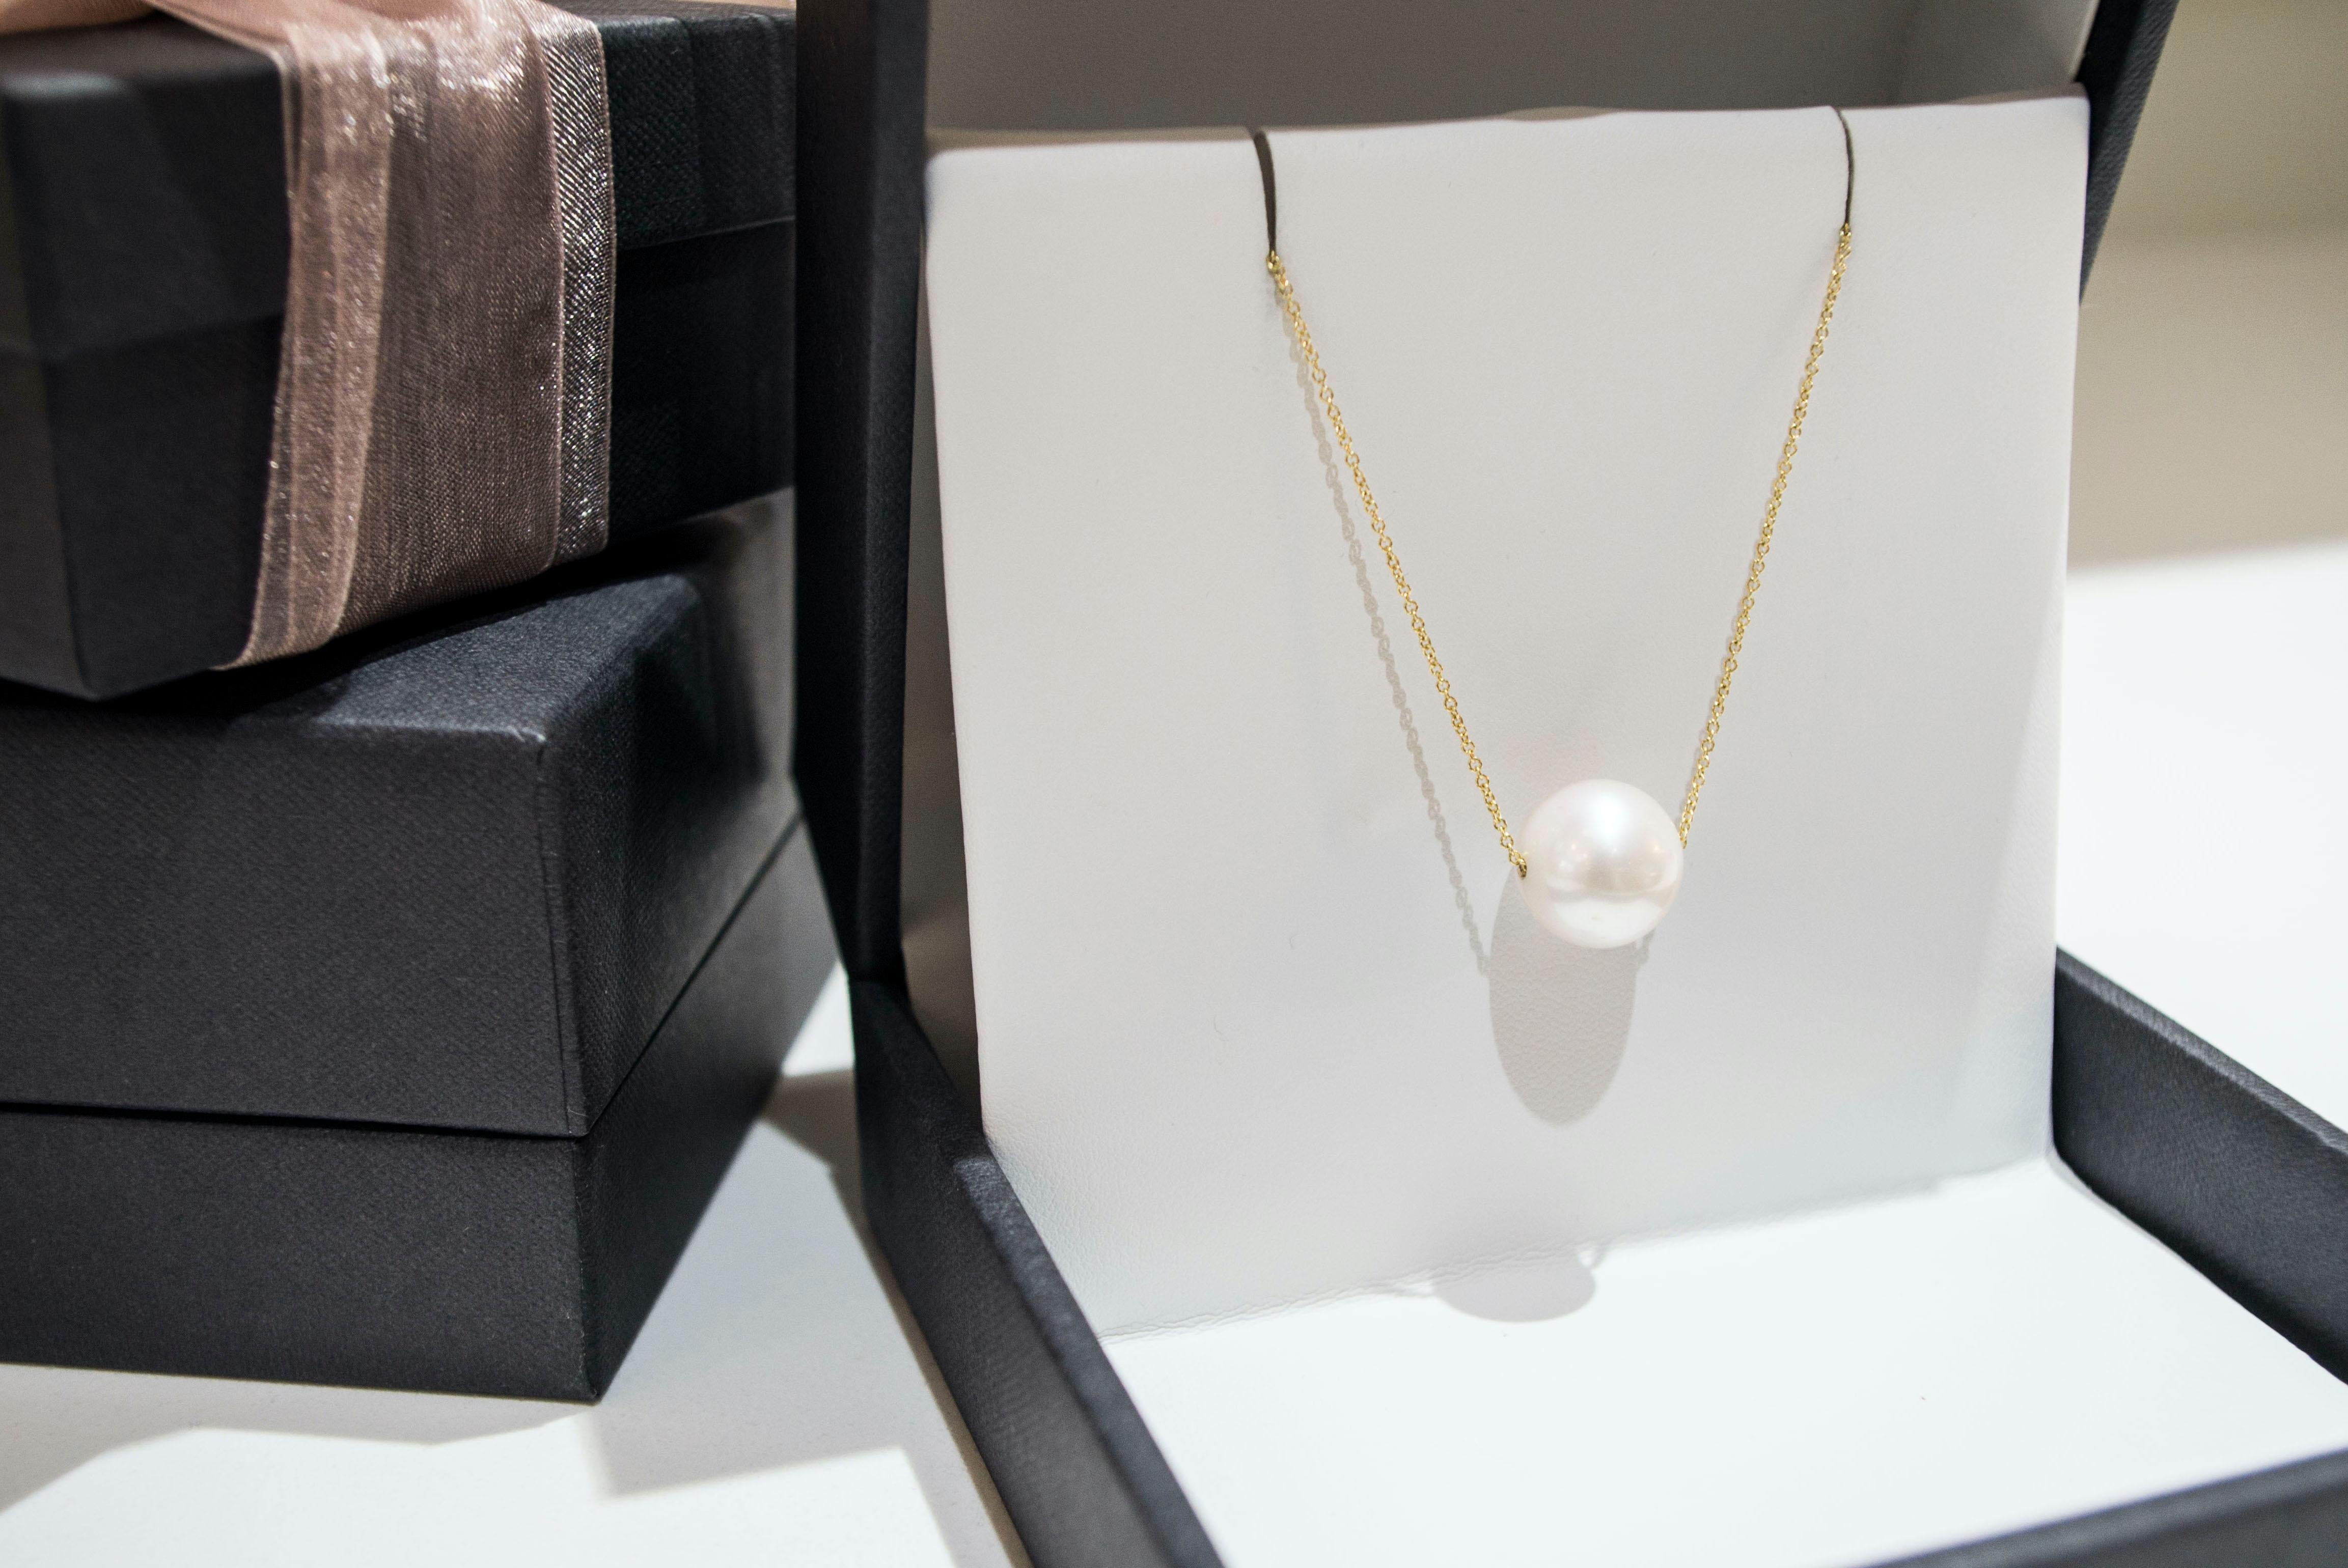 Faye Kim's single pearl pendant slide. Oversized white freshwater culture pearl on a yellow cable chain.
Simple, classic and always stylish!

Pearl:  13MM
Chain:  16